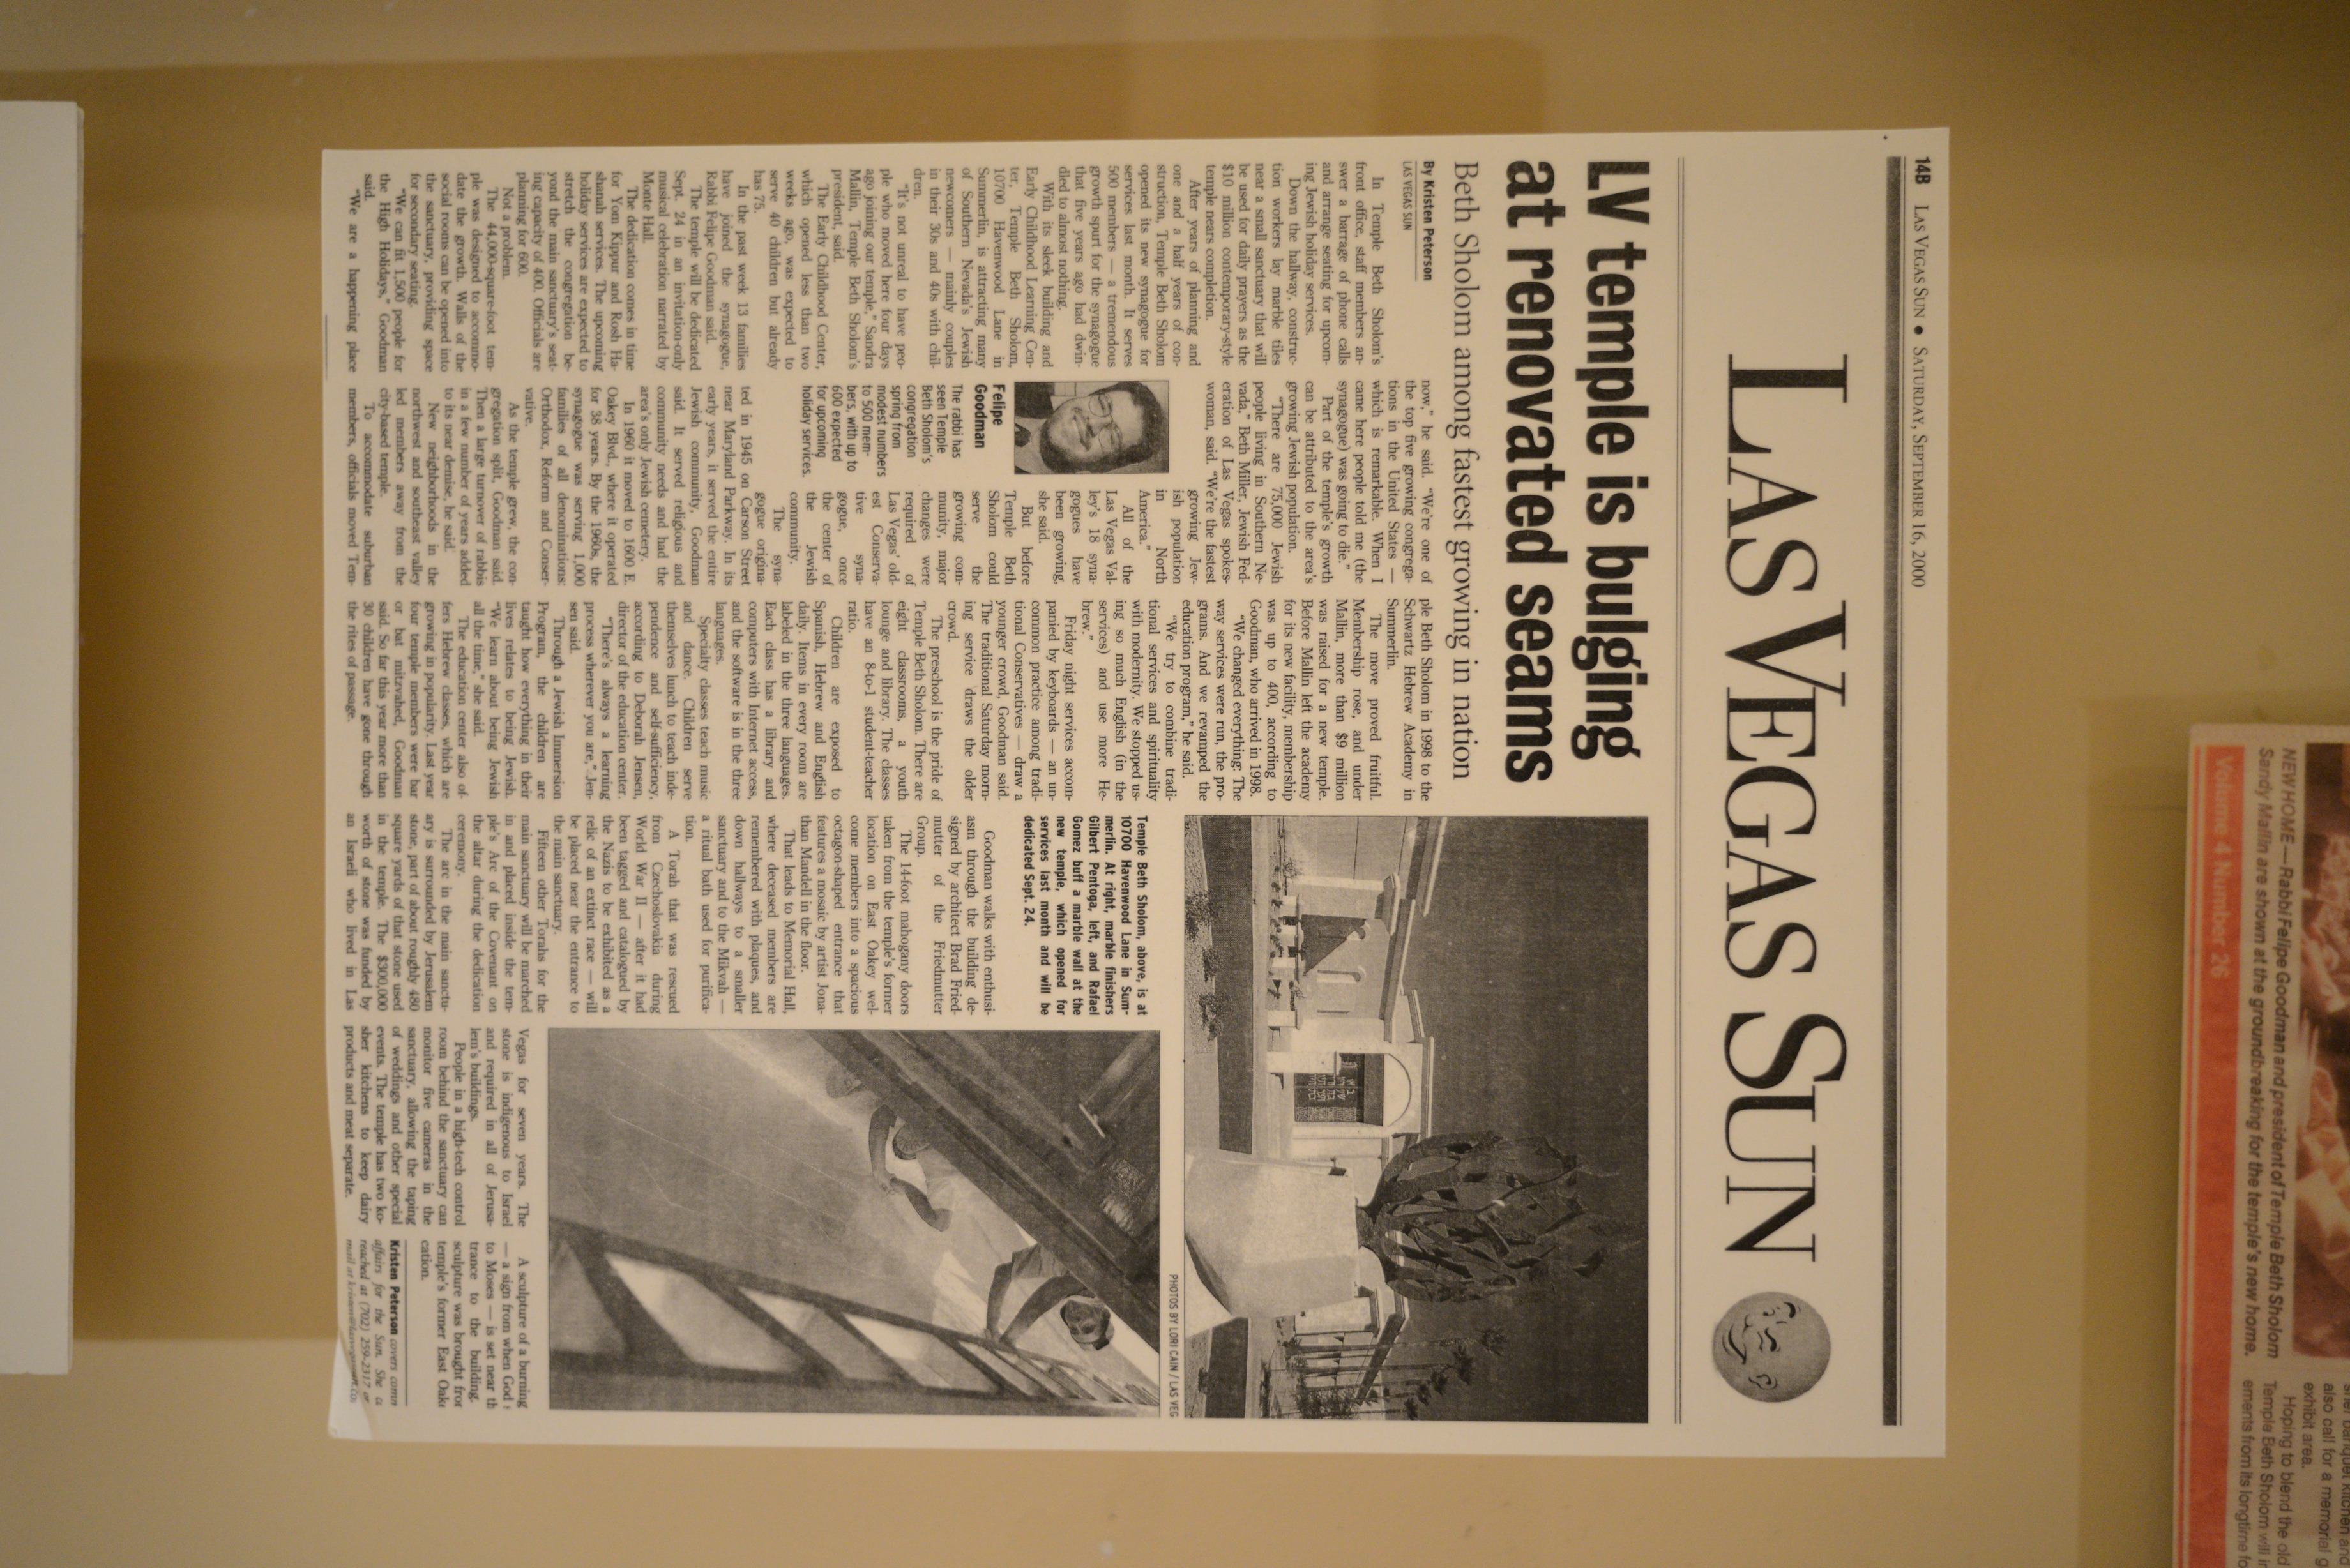 Photograph of newspaper clipping, LV temple is bulging at renovated seams: Beth Sholom among fastest growing in nation, Las Vegas Sun, September 16, 2000